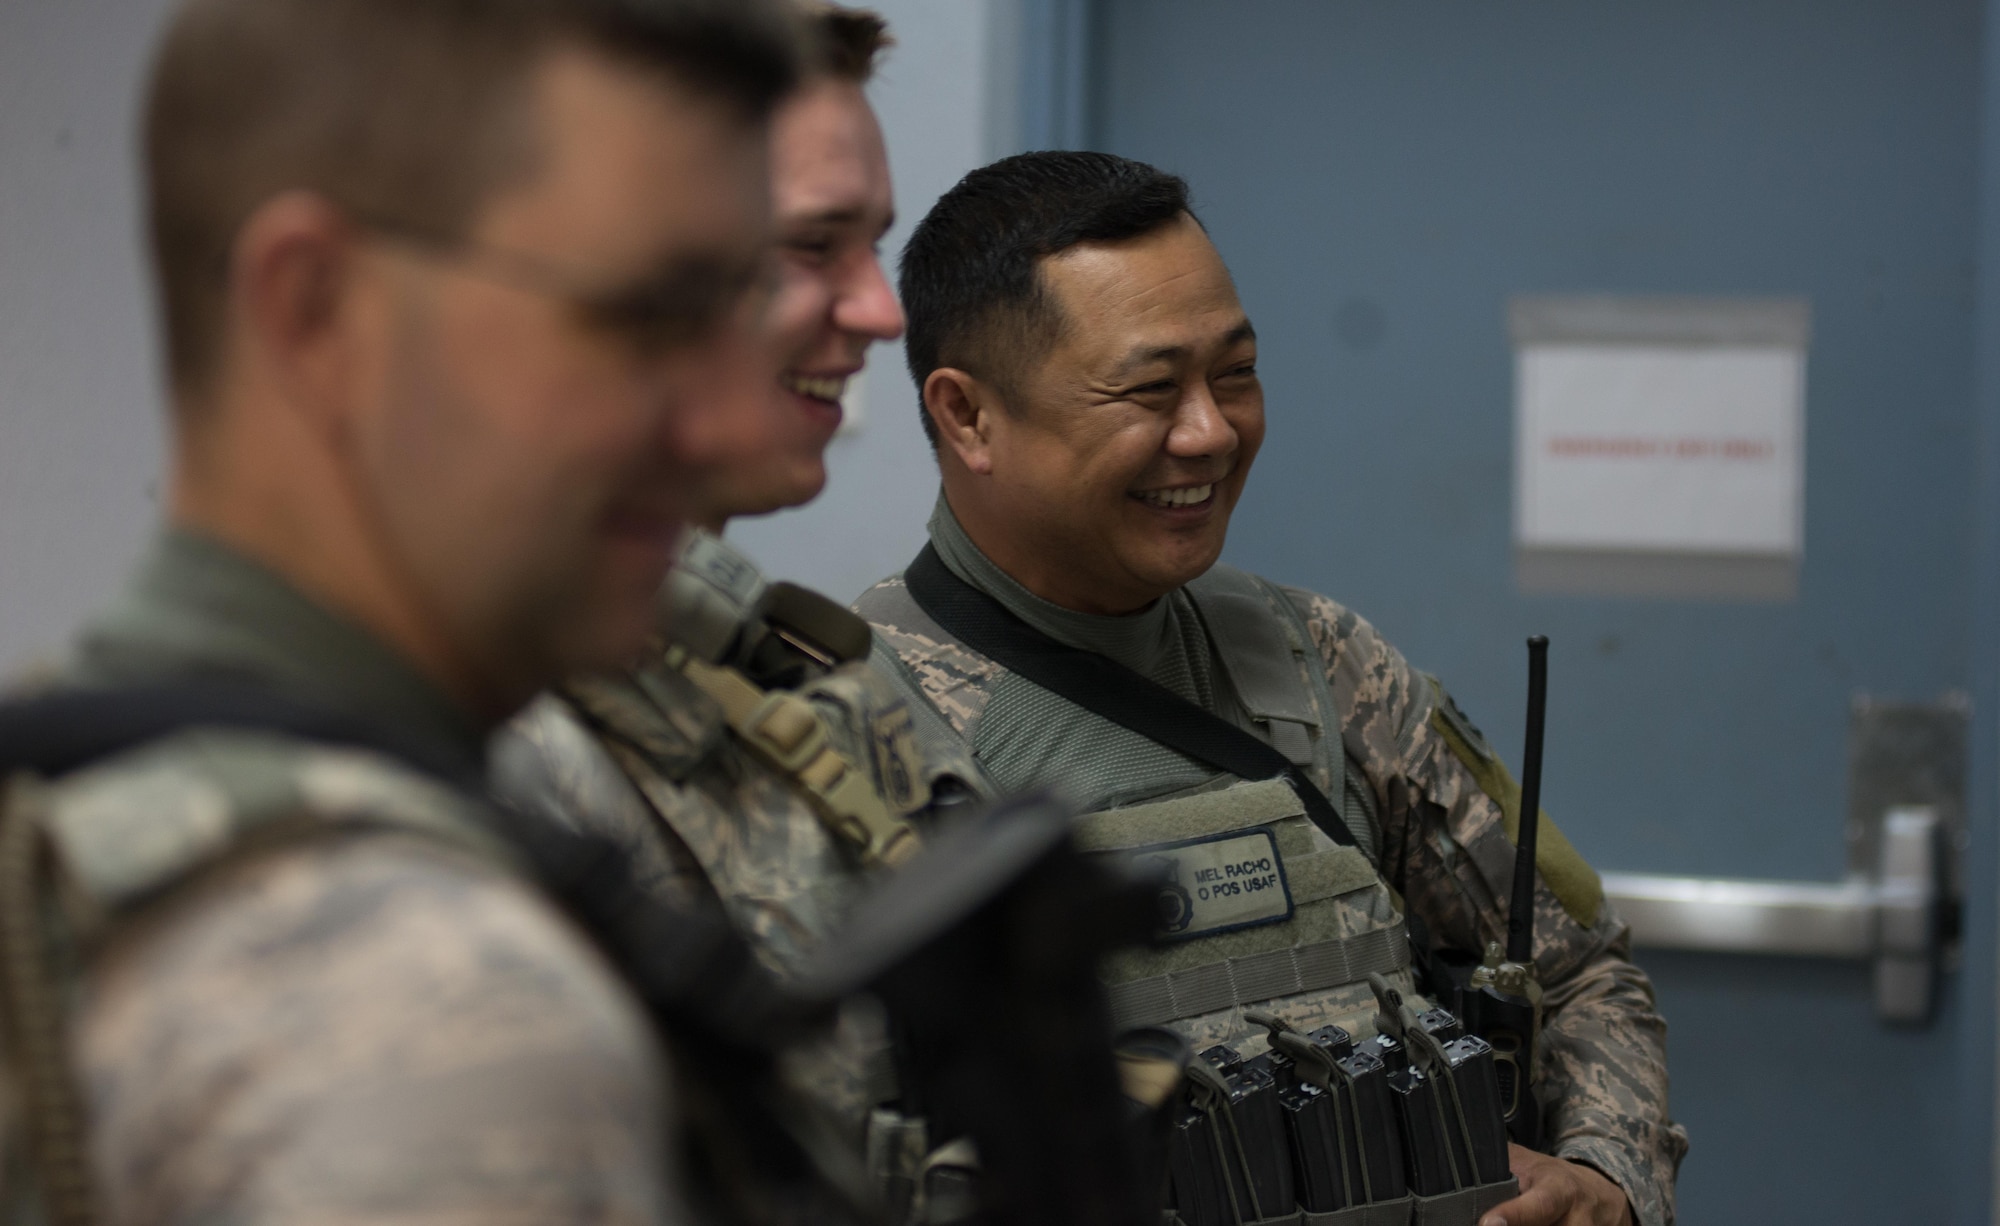 U.S. Air National Guard Staff Sgt. Melquiadez Racho, a patrol team lead with the 407th Expeditionary Security forces Squadron, shares a moment of jokes with his wingmen before shift begin May 13, 2017, in Southwest Asia. Racho is a traditional guardsman deployed from the 254th Security Forces Squadron at Andersen Air Force Base, Guam. When not on Air Force orders, Racho serves as a police instructor with the Department of Defense on Guam. He deployed with fellow ANG members. (U.S. Air Force photo by Staff Sgt. Alexander W. Riedel)